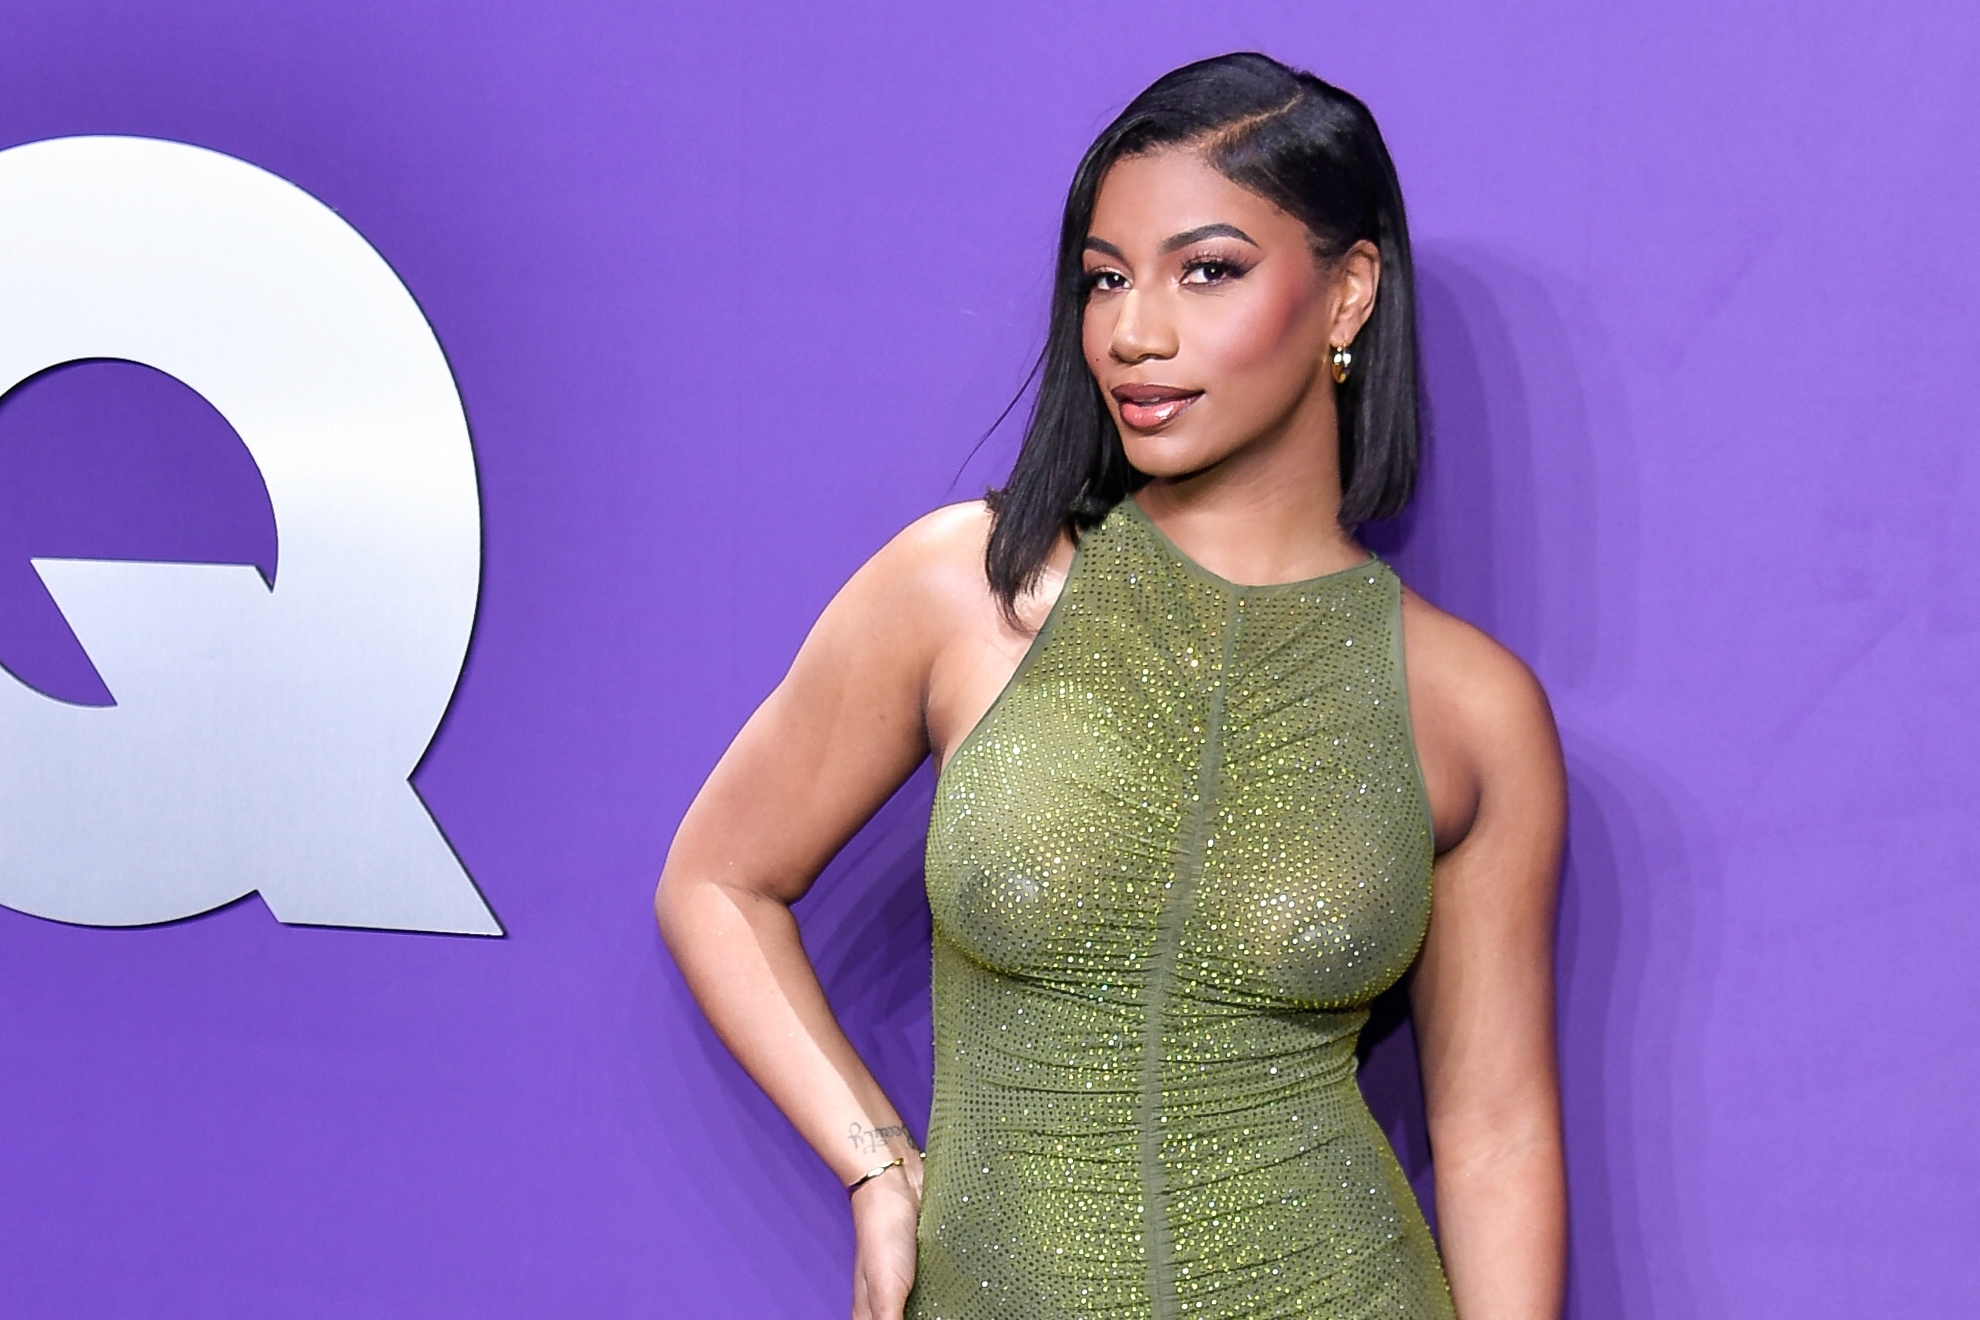 Taylor Rooks attended the GQ Global Creativity Awards and created a fuzz online with her outfit